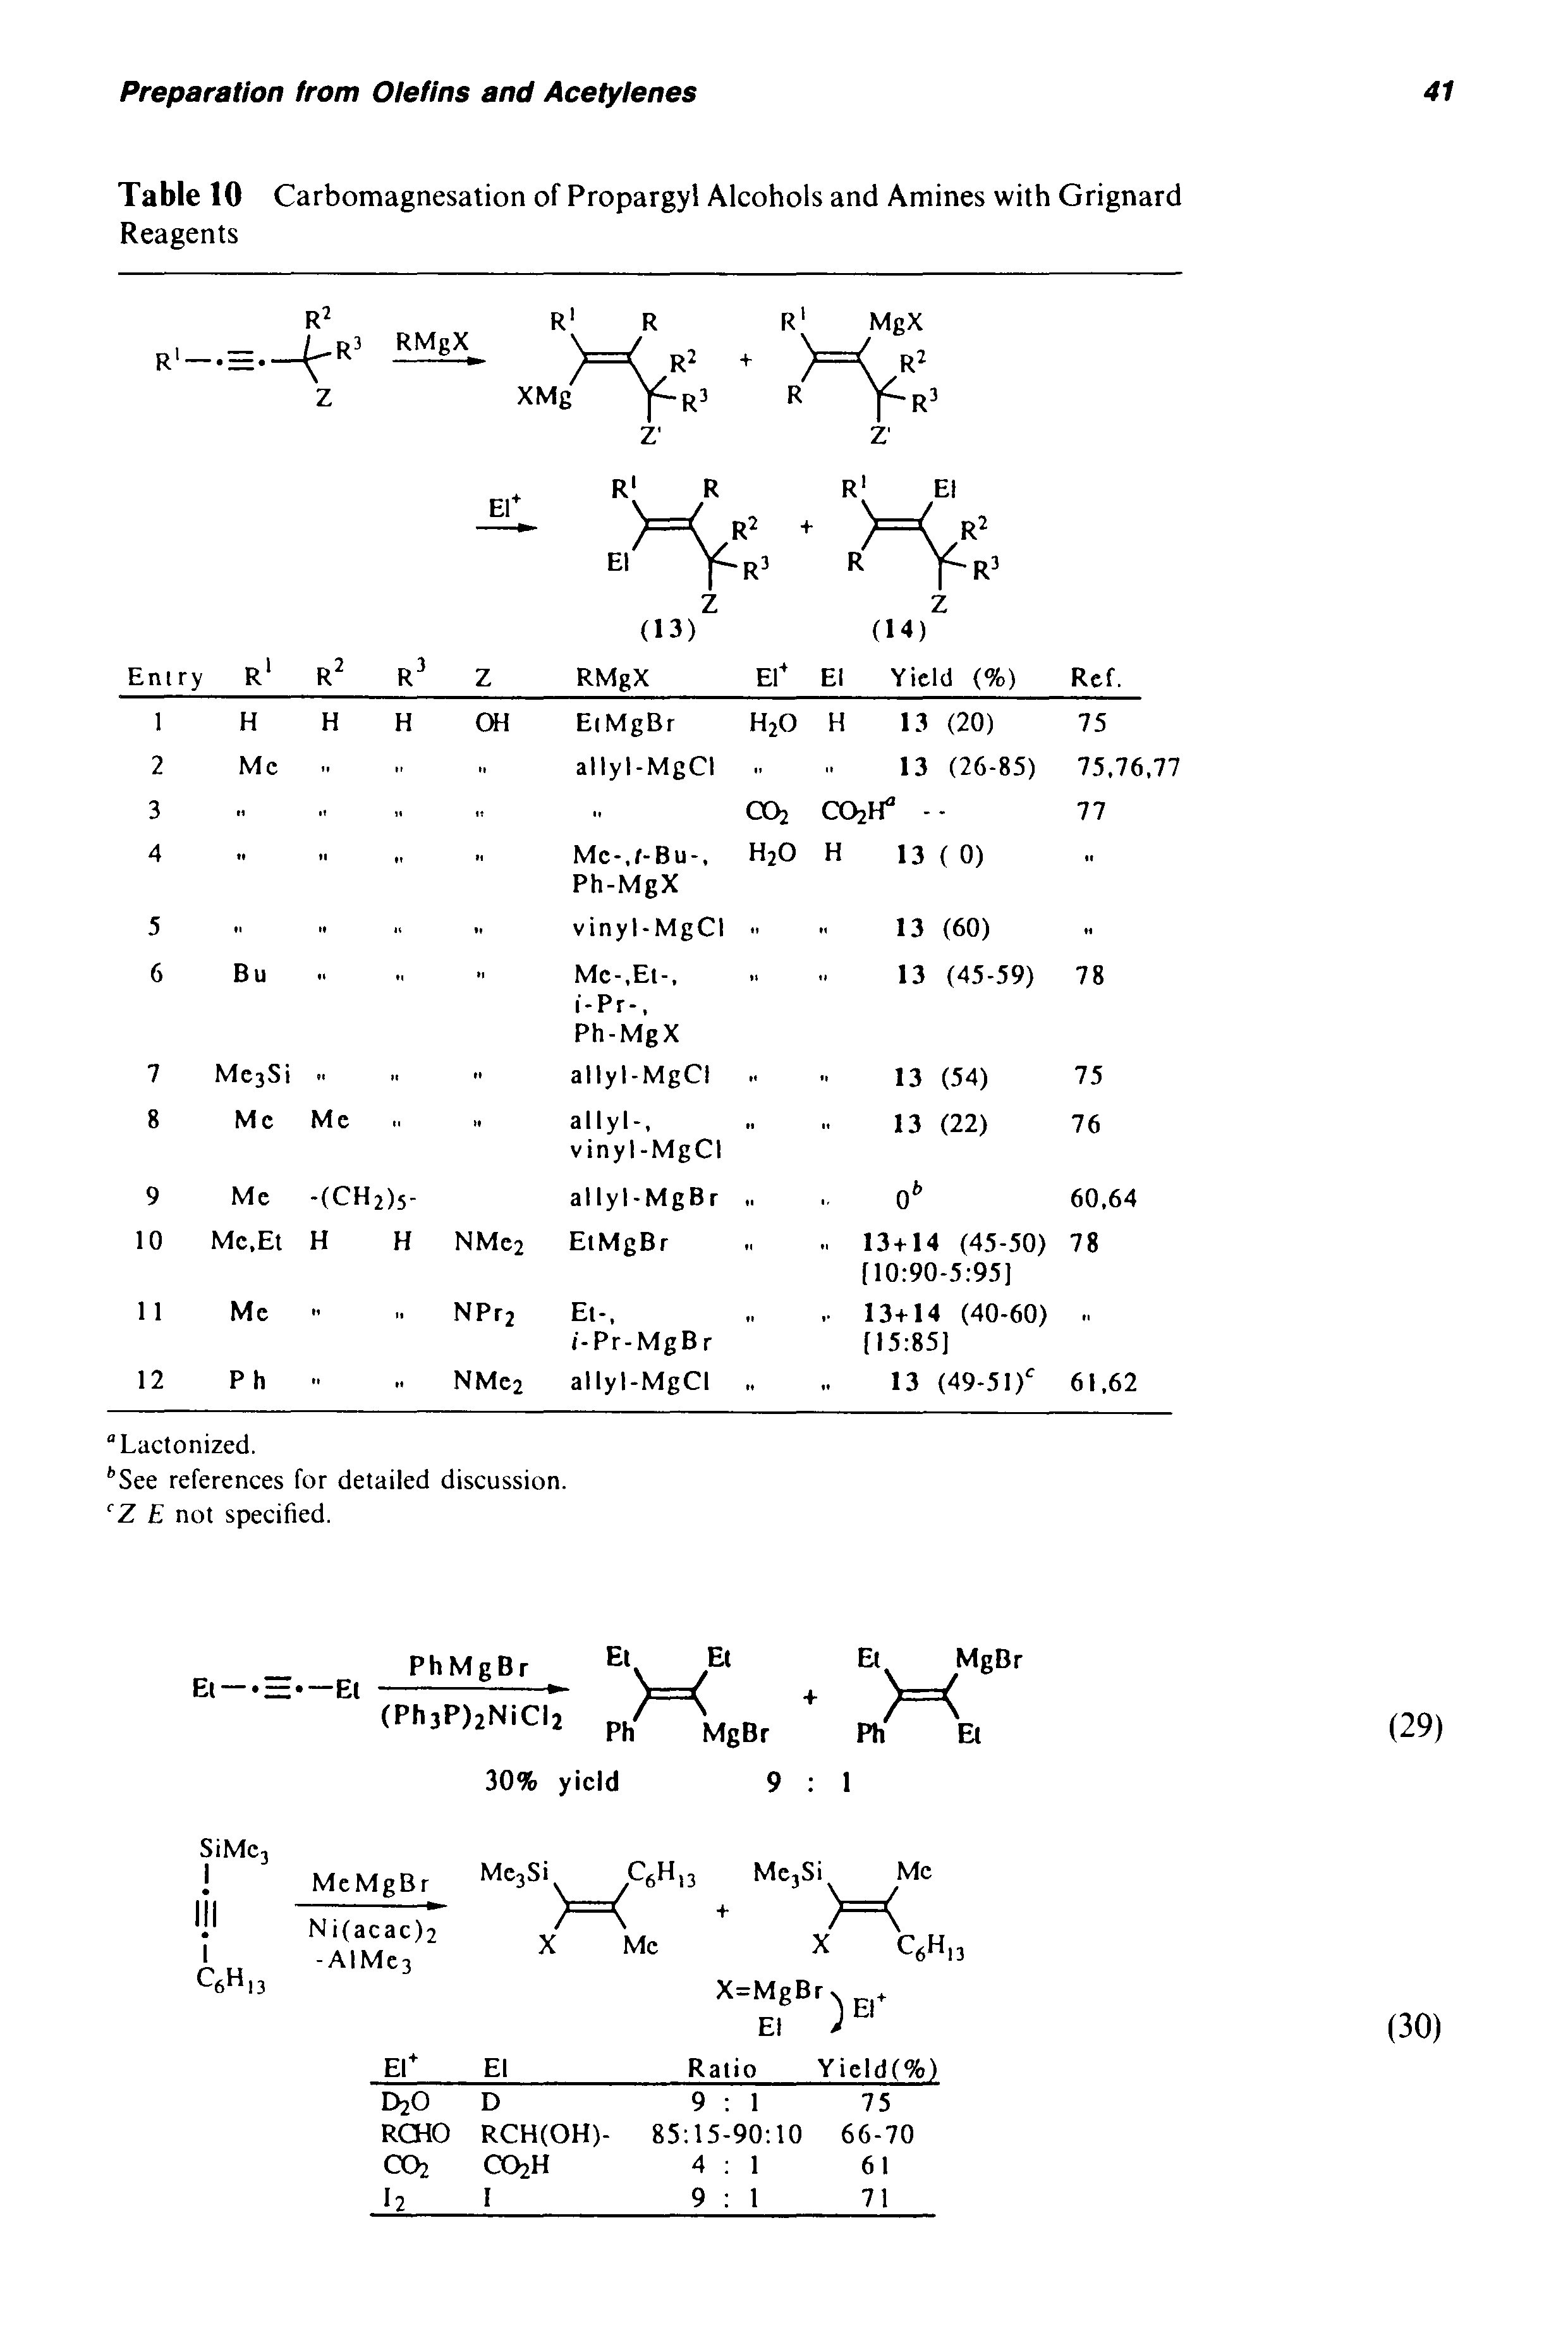 Table 10 Carbomagnesation of Propargyl Alcohols and Amines with Grignard Reagents...